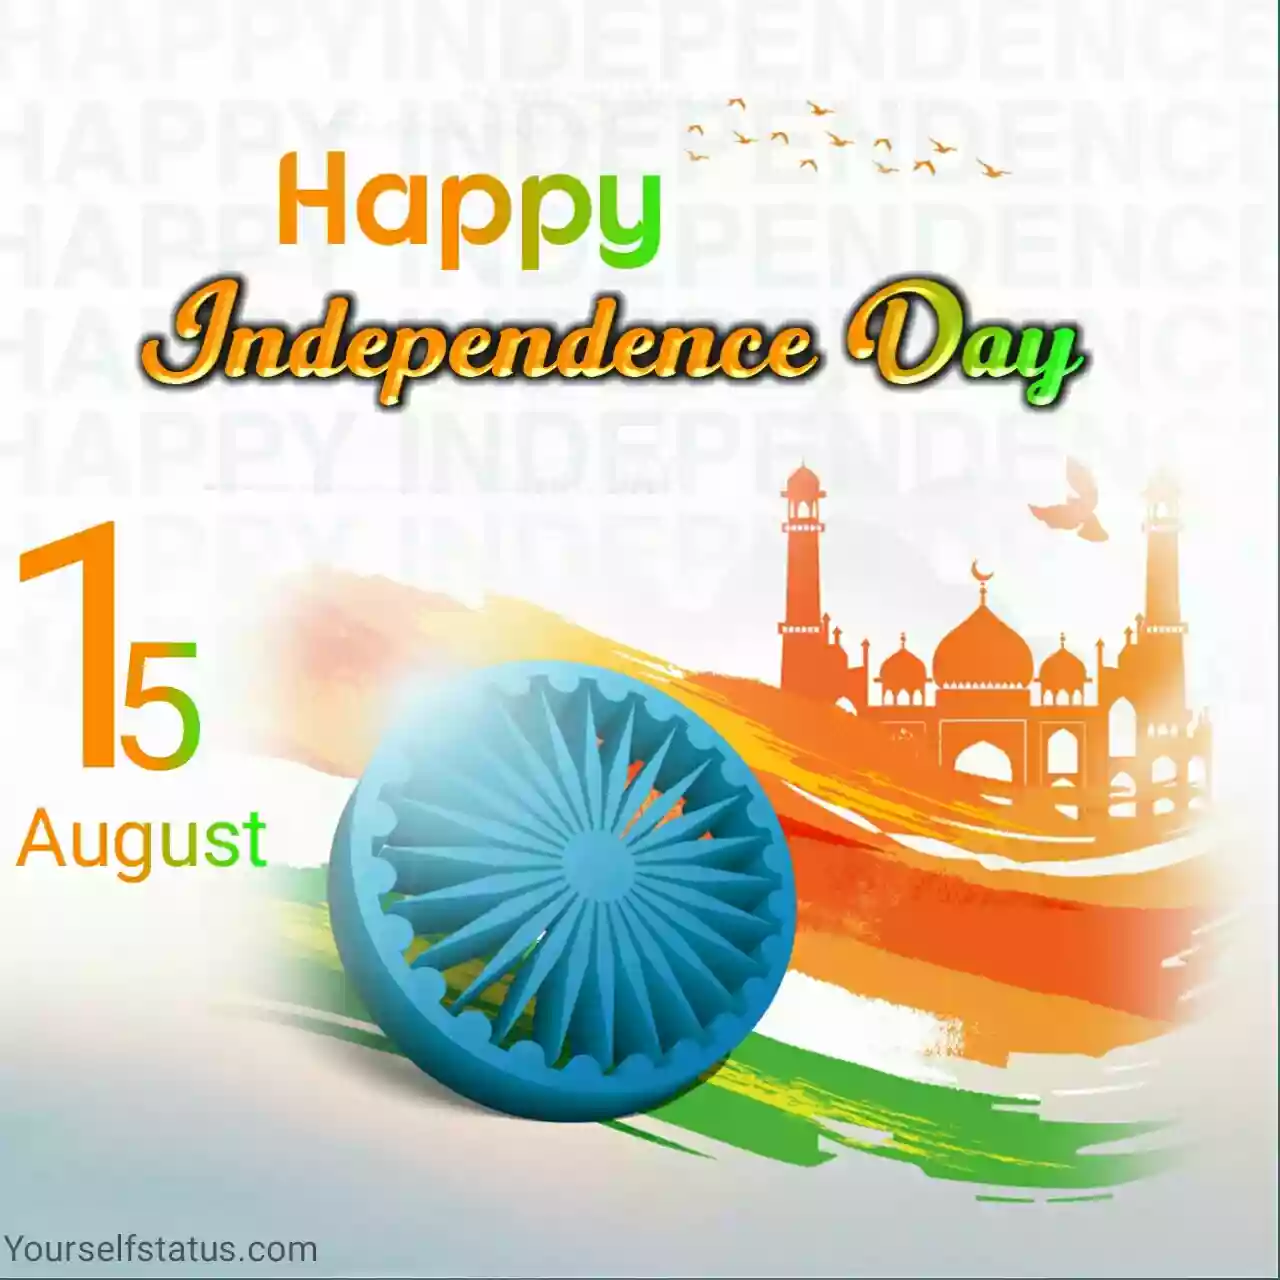 Happy Independence Day wishes